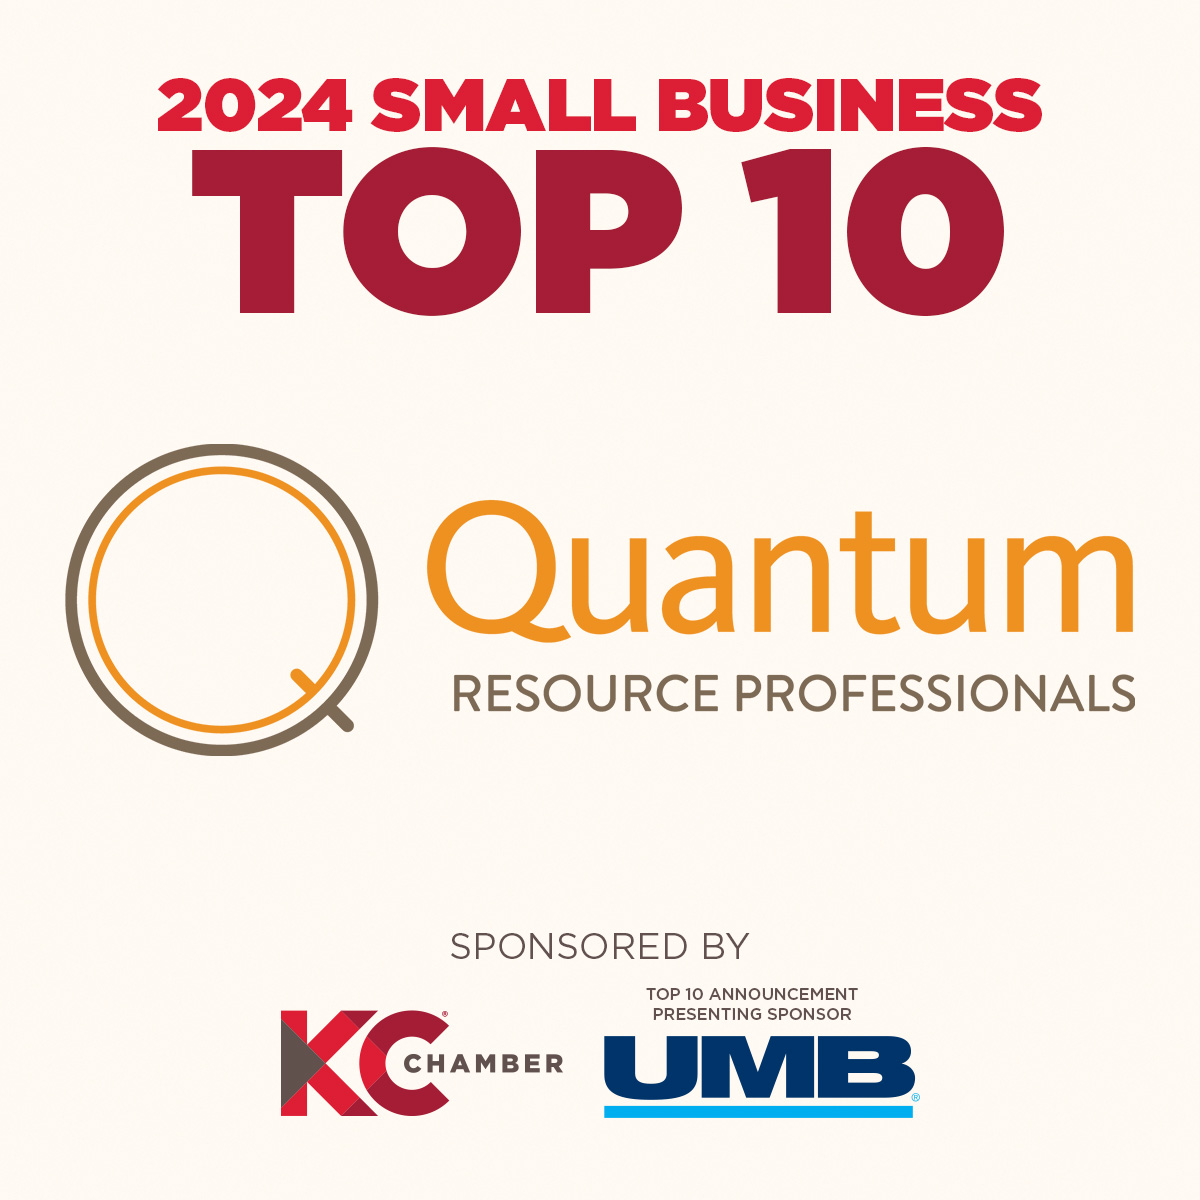 The moment you all have been anticipating has arrived! It's time to reveal which companies have been selected as our Top 10 Small Businesses. Without further ado, the first company announced as a Top 10 Small Business for 2024 is @Quantum_Pros. Congratulations!